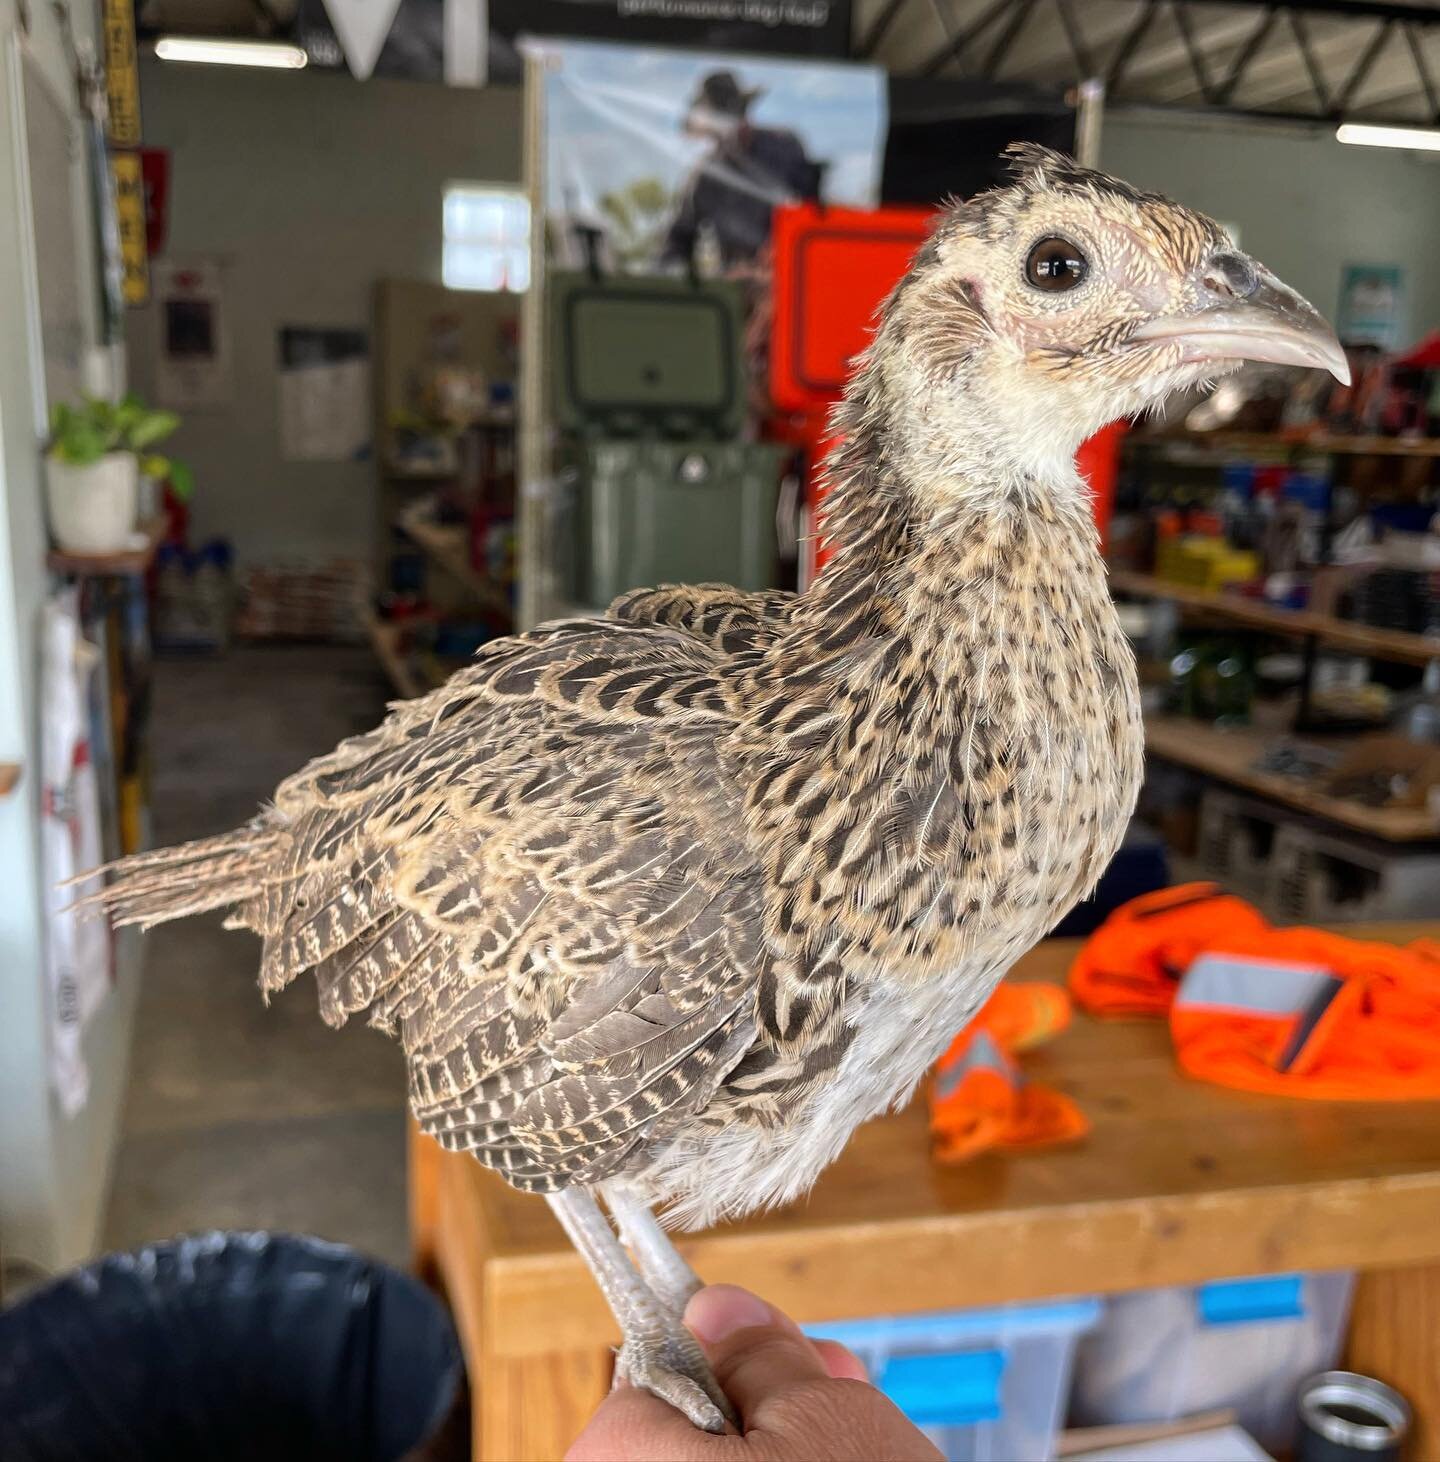 We have seven Ring-necked Pheasants ready to go home with someone for $6 a chick!